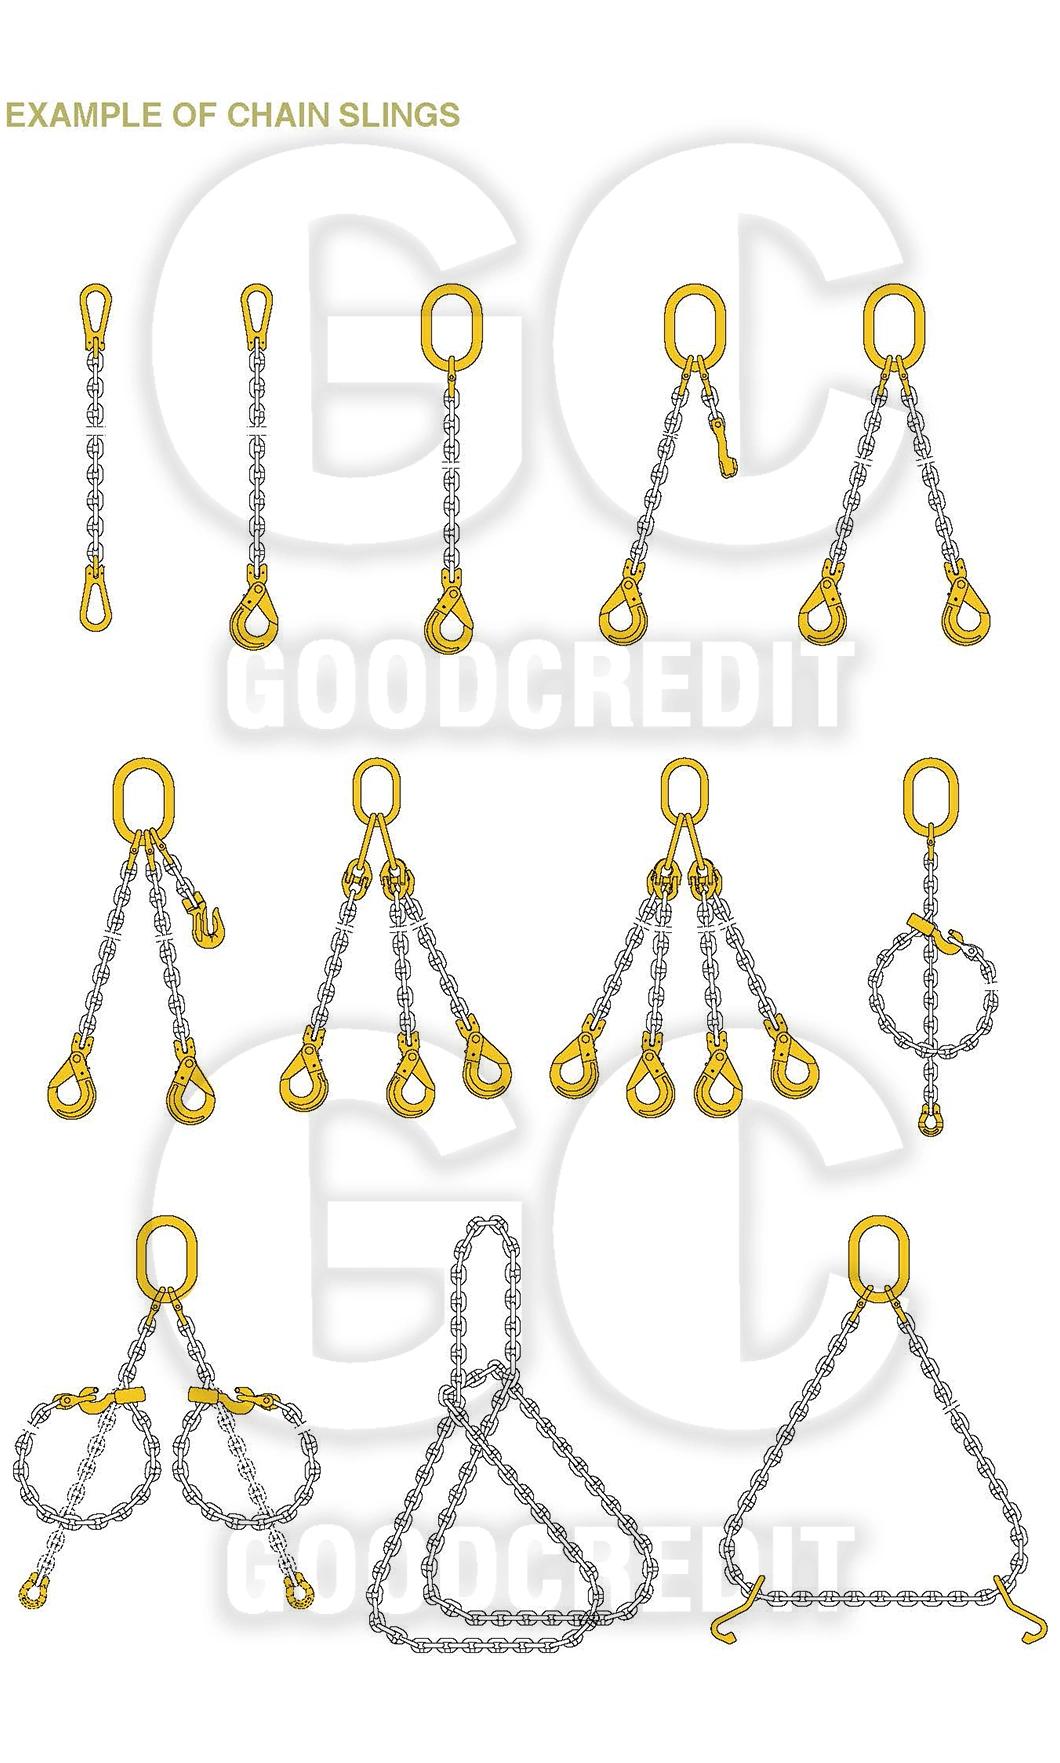 Ordinary English Standard Mild Steel Short Link Chain with All Sizes